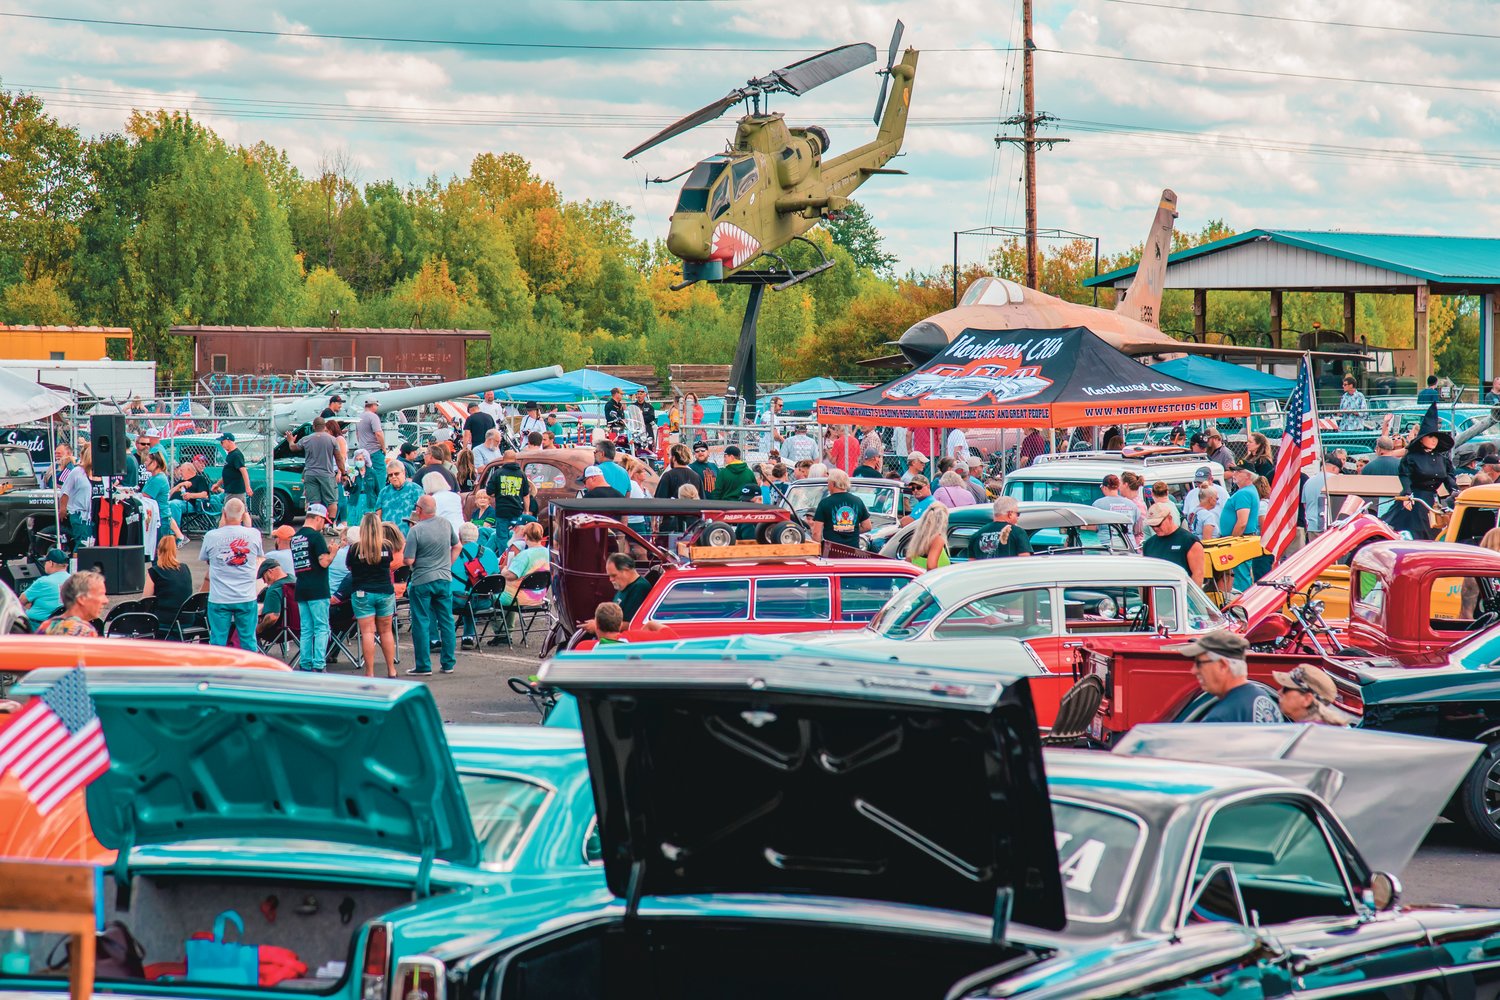 Crowds gathered at the Veterans Memorial Museum on Sunday for the Rust or Shine Car Show and Music Festival in Chehalis.